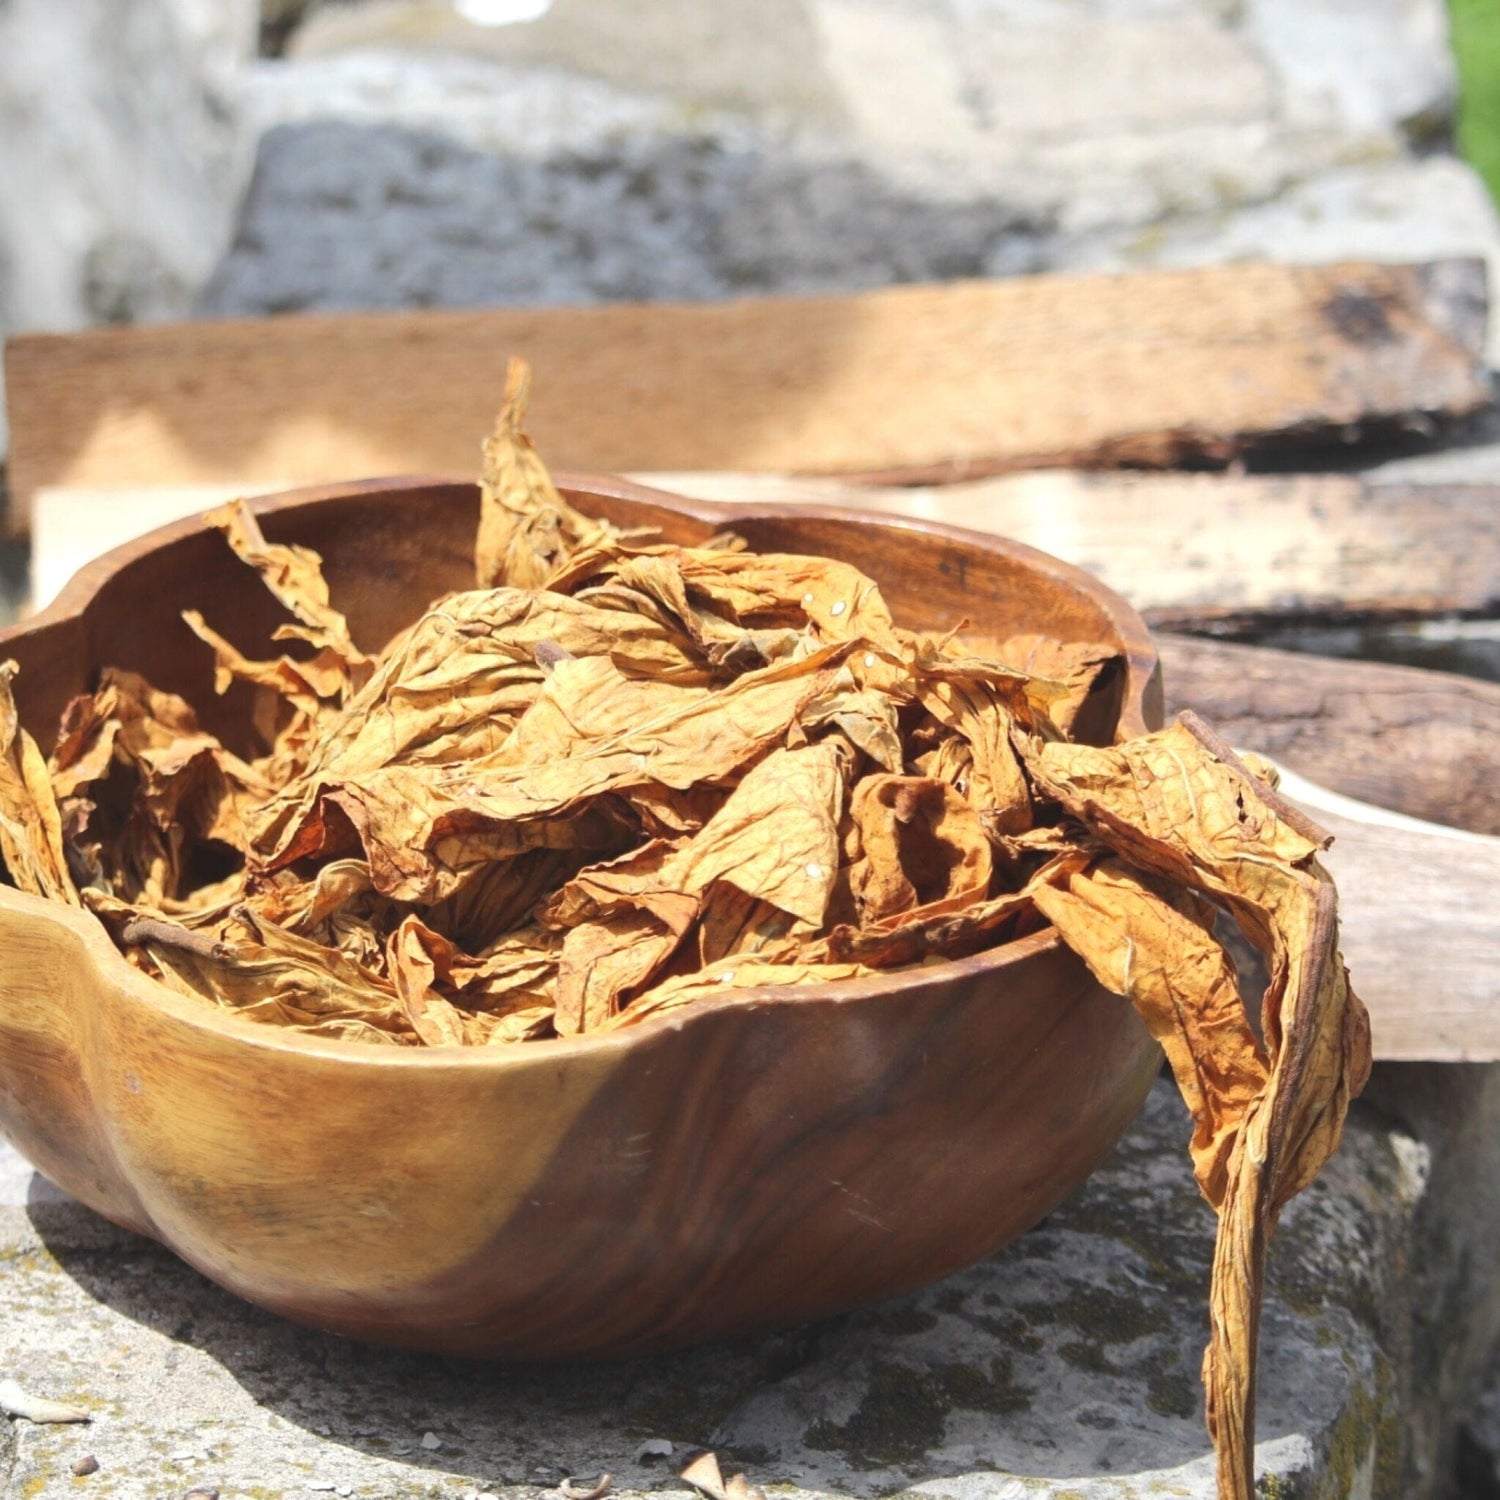 Dried tobacco leaves in brown wooden bowl